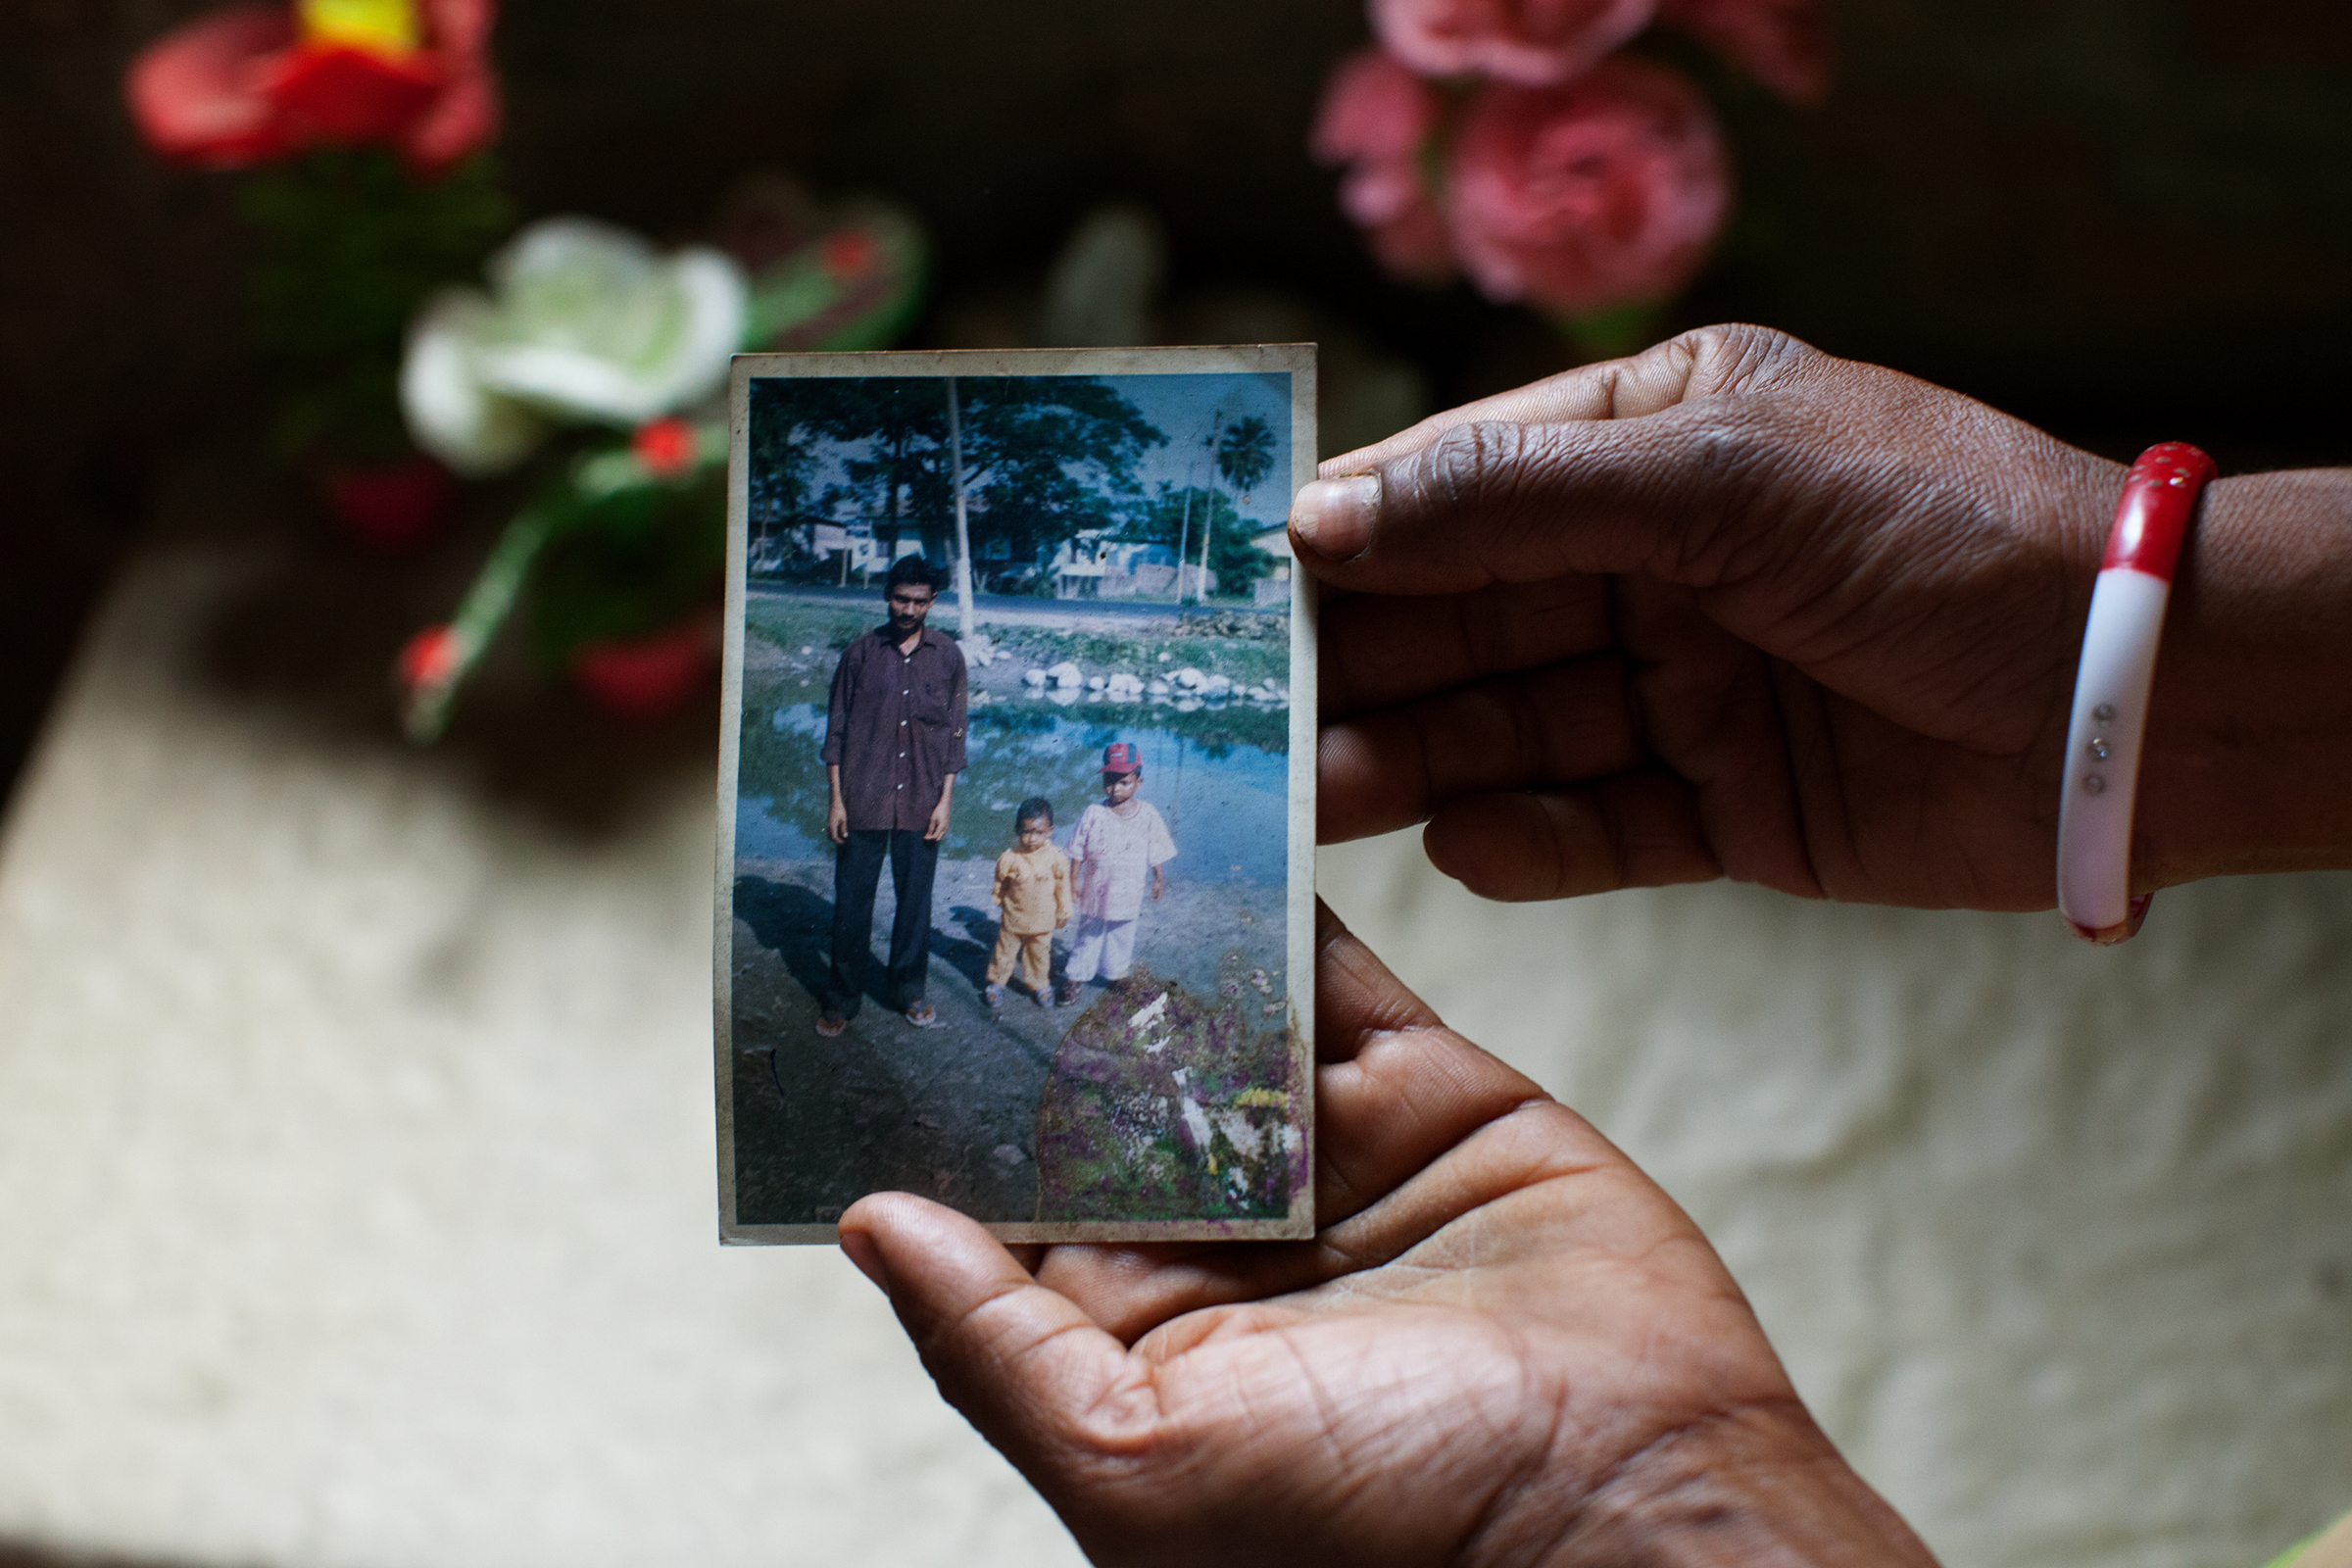 Mamtaj Begum holds a photograph of her husband, Mahuruddin, who is held in a detention center in Tezpur. Mahuruddin was photographed with his son and nephew.